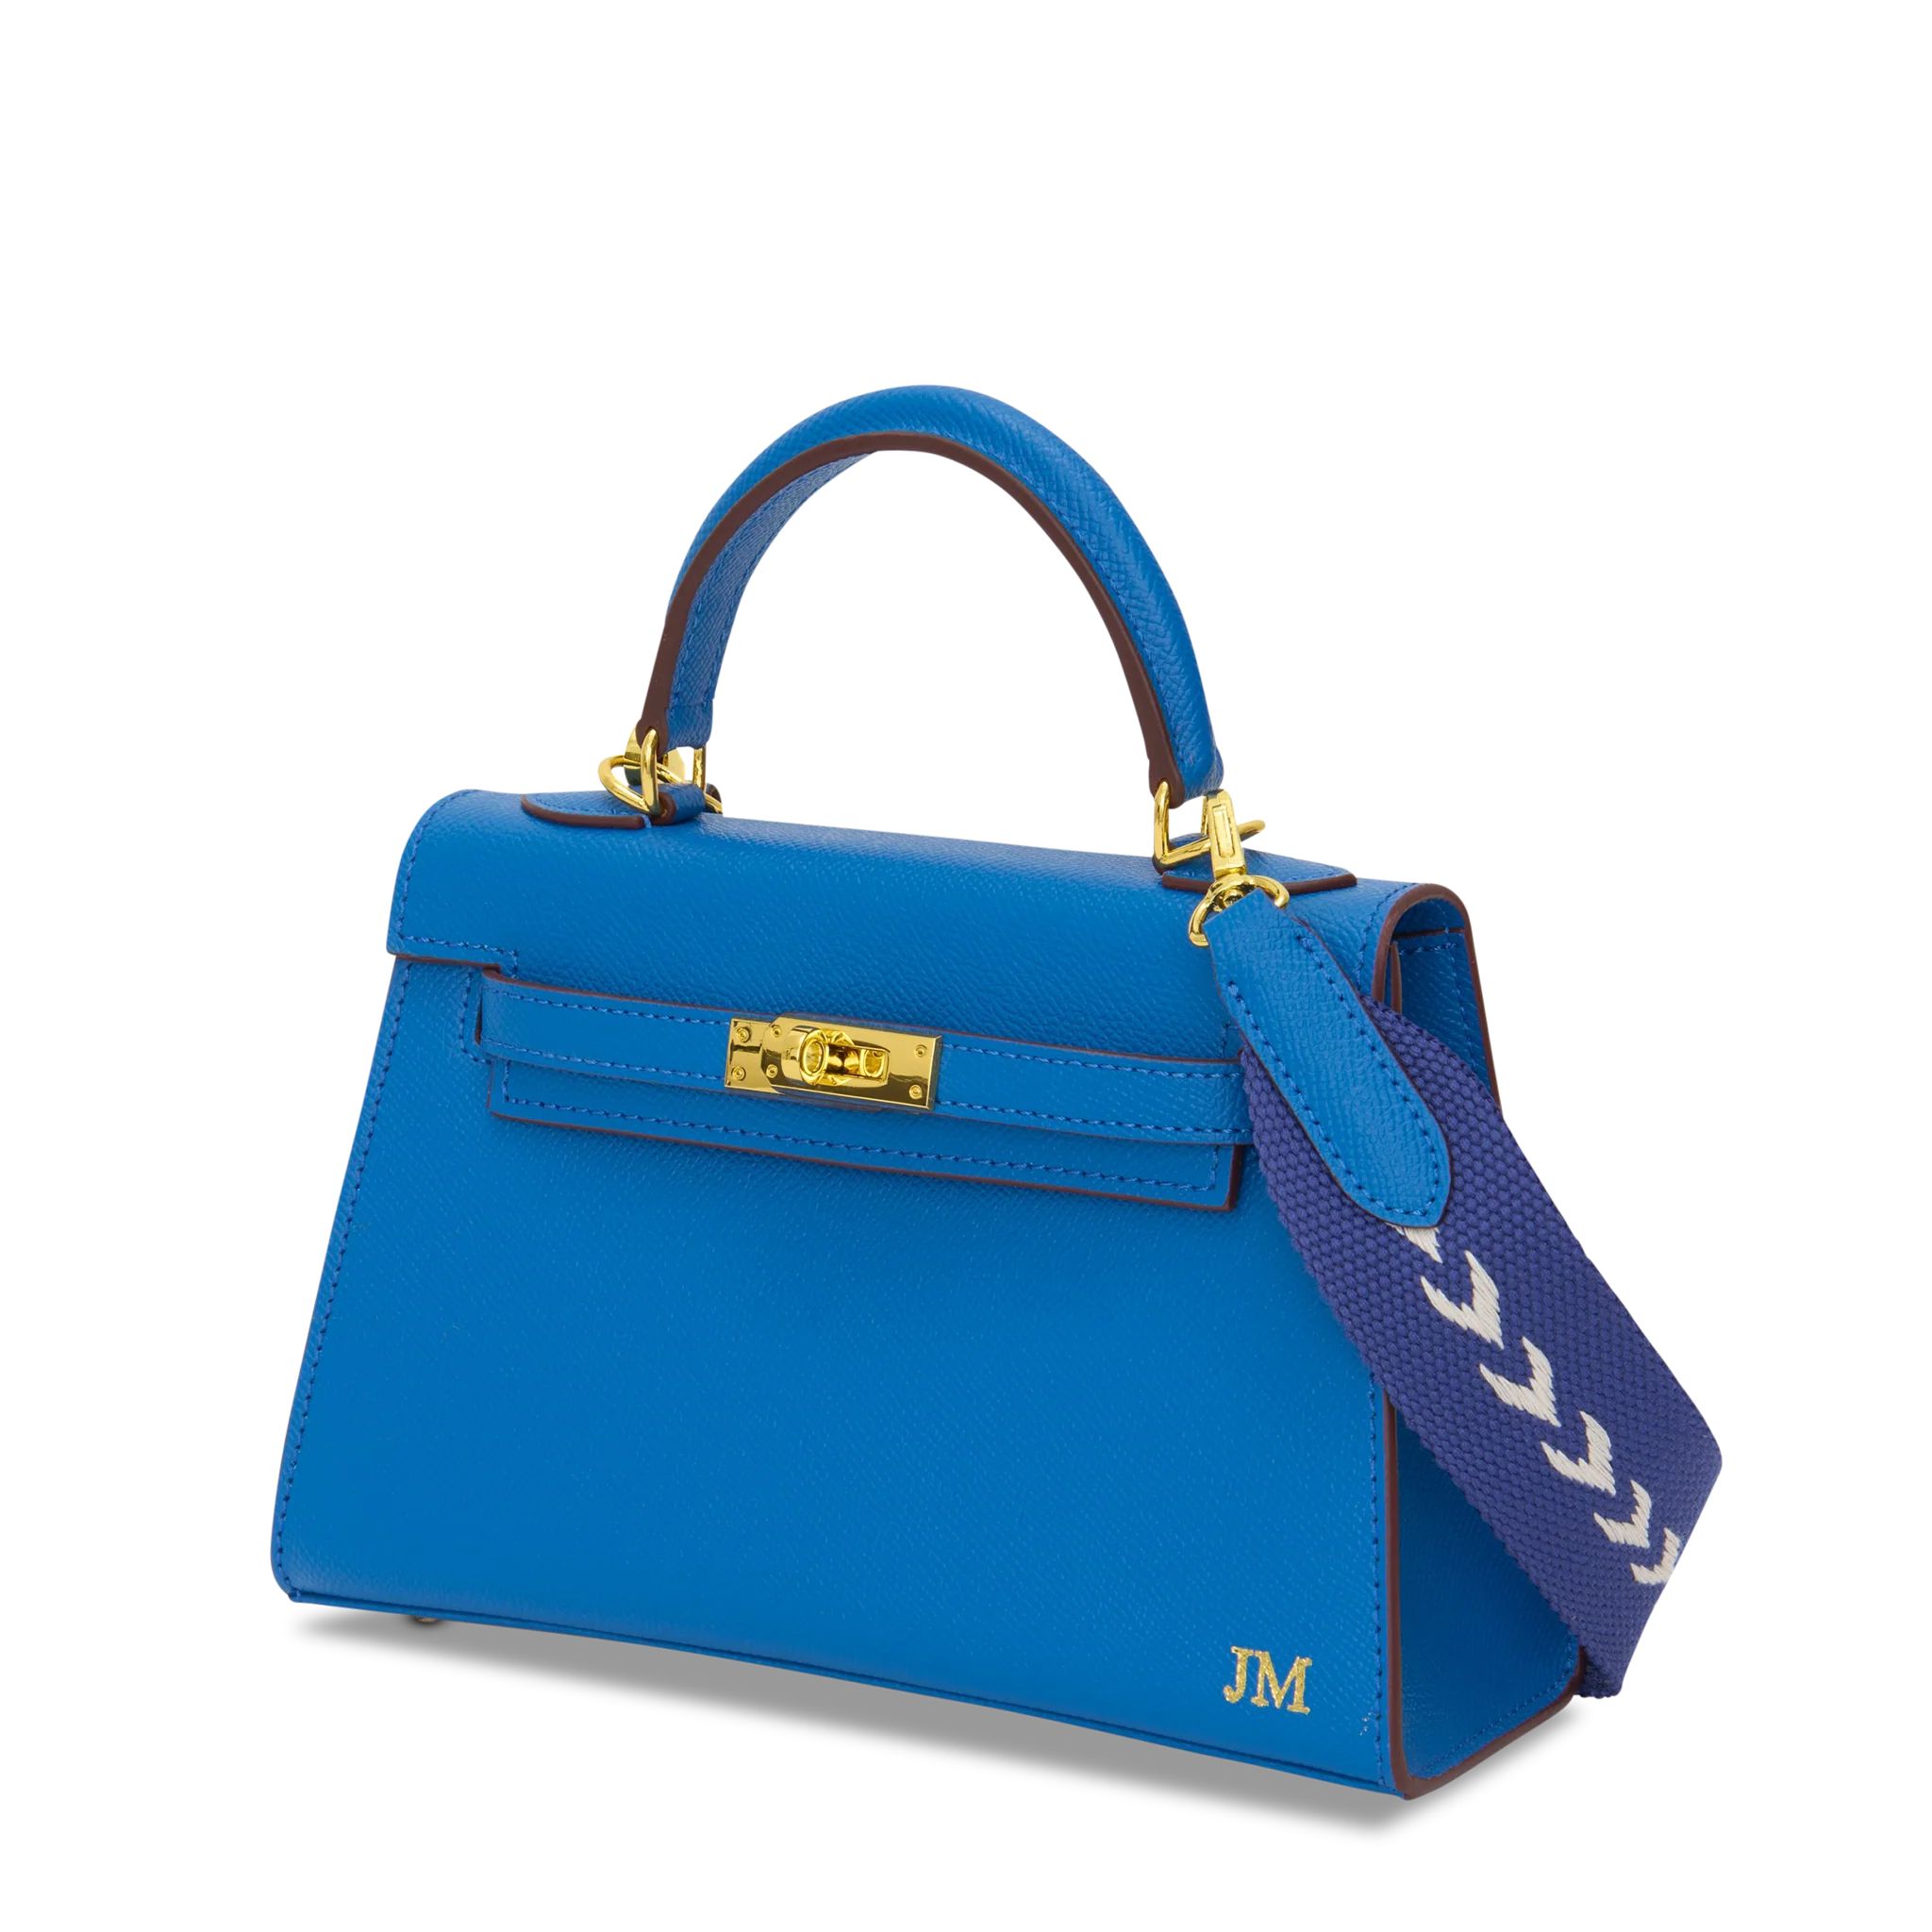 Lily and Bean Hettie Mini Bag - Lightening Blue with Initials with Fab | Lily and Bean